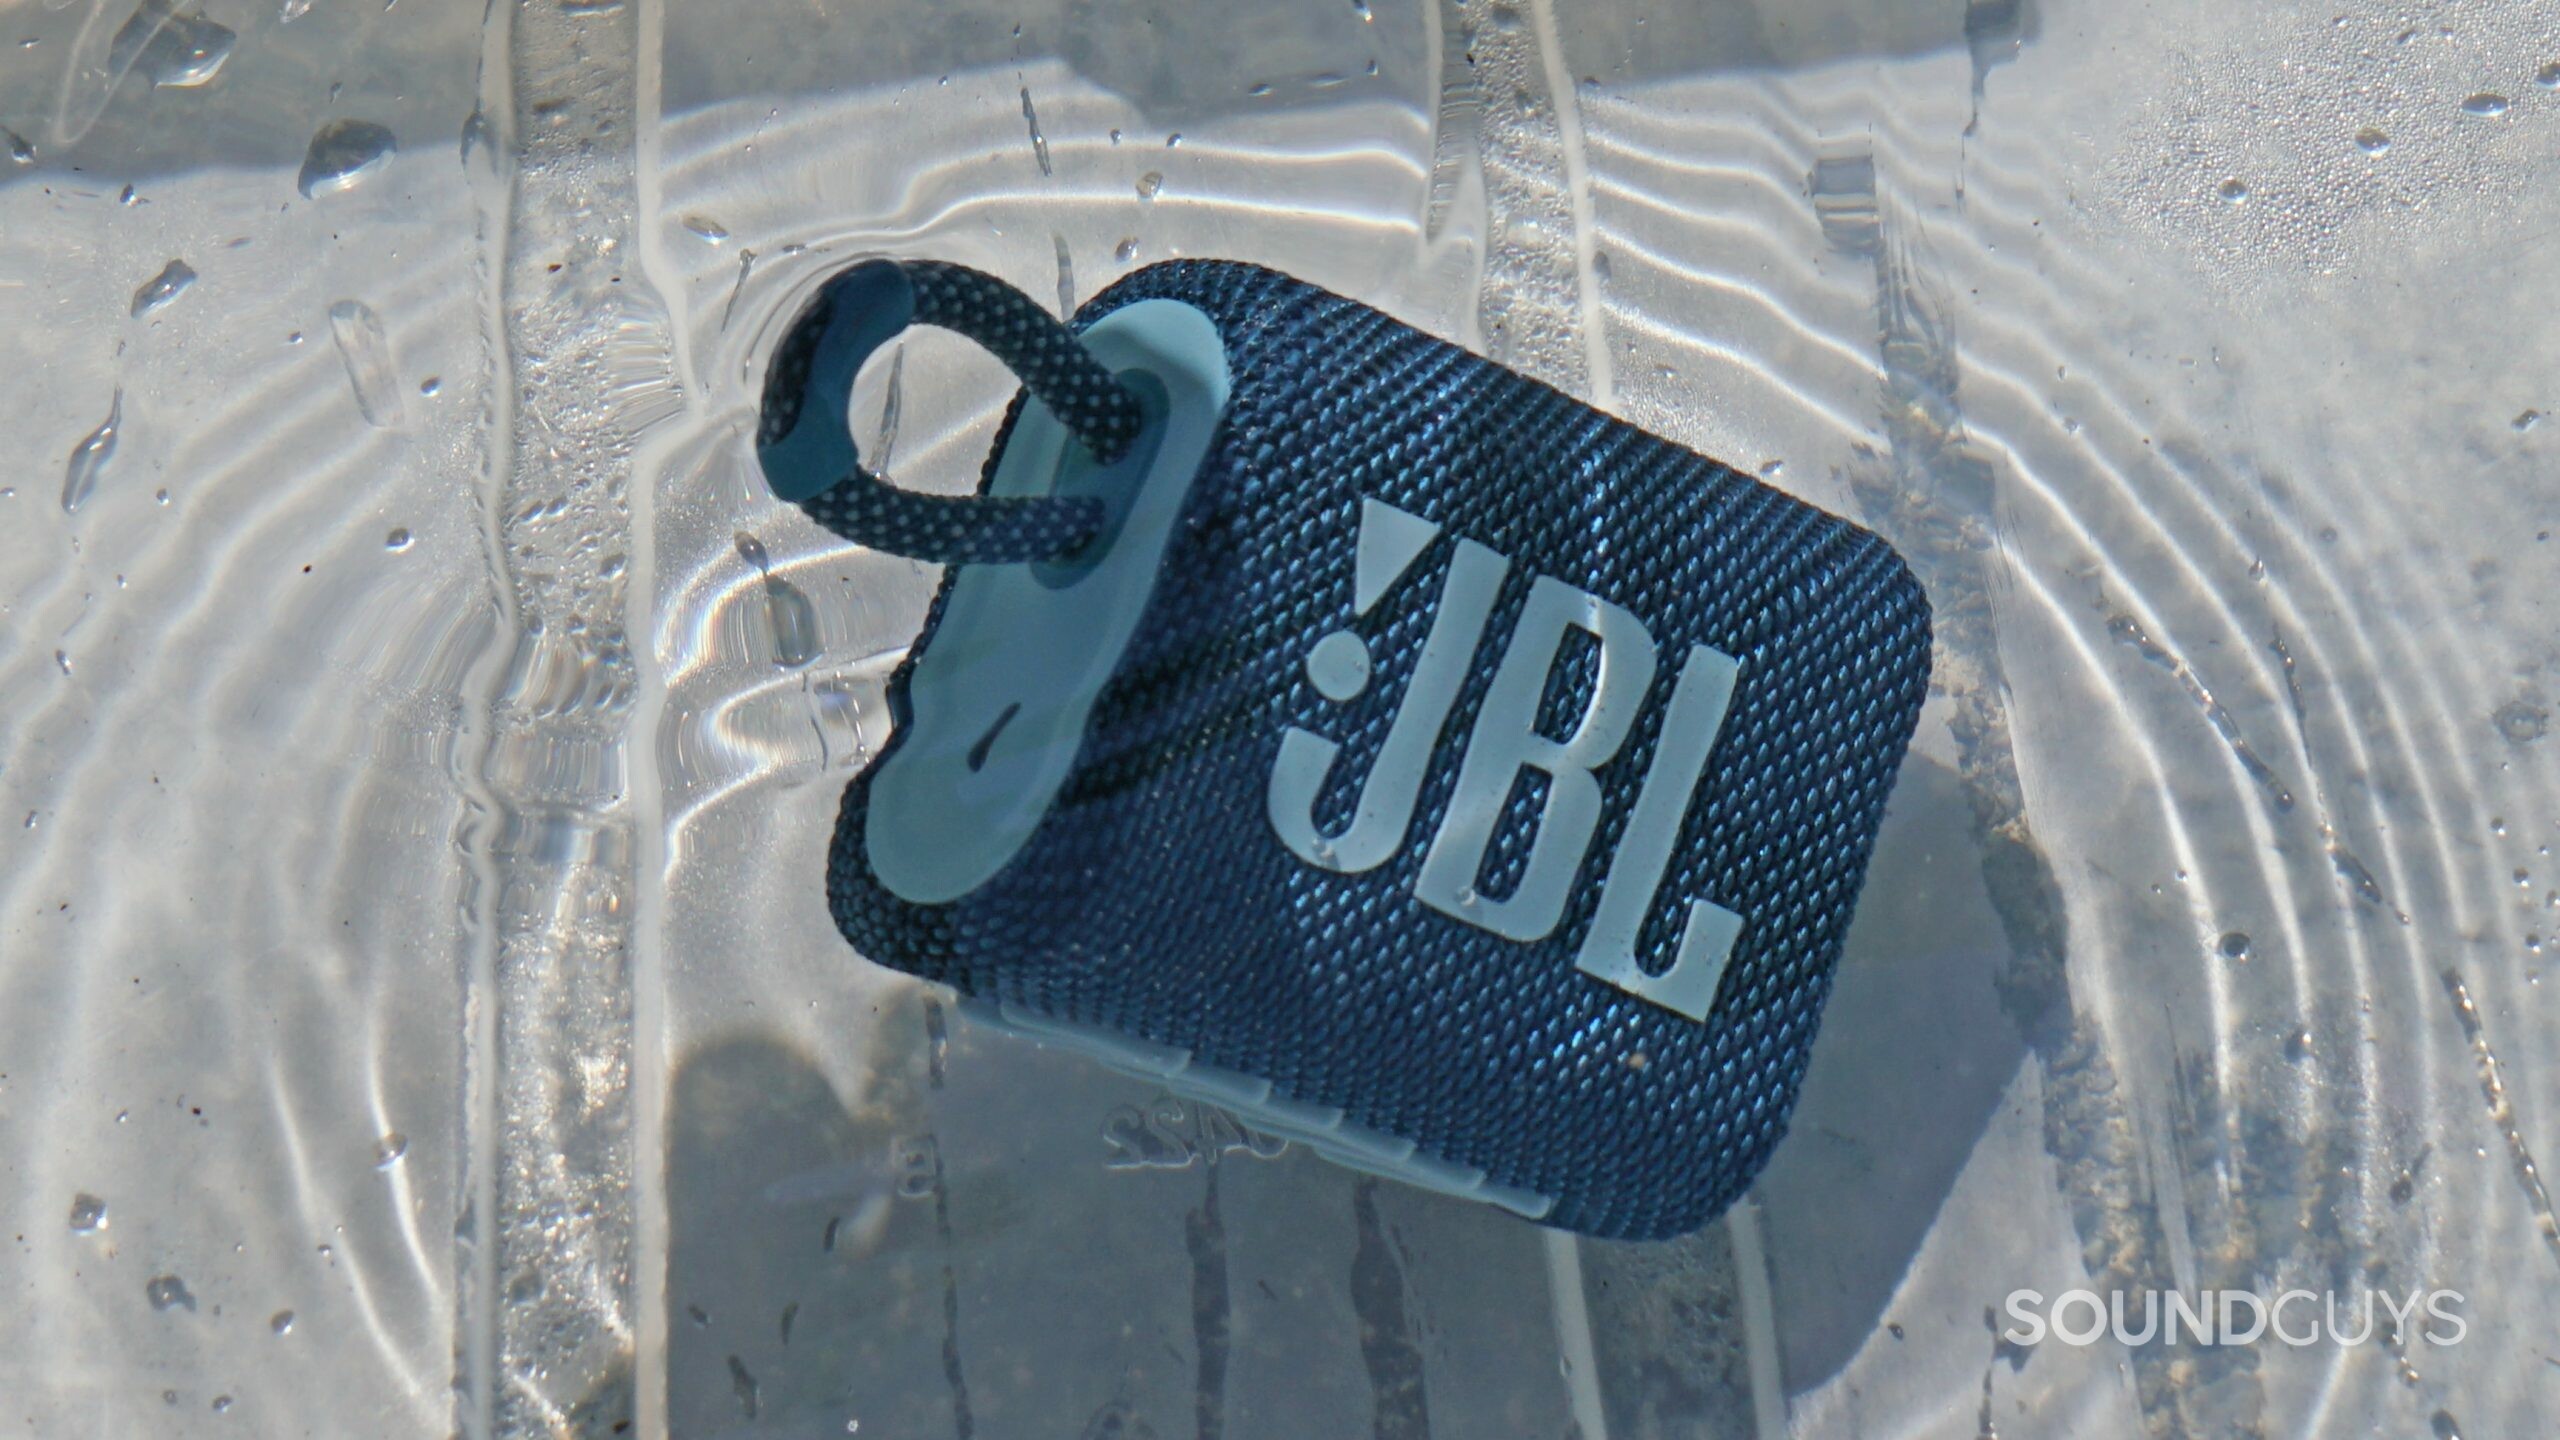 The JBL Go 3 bluetooth speaker submerged in a water outdoors.